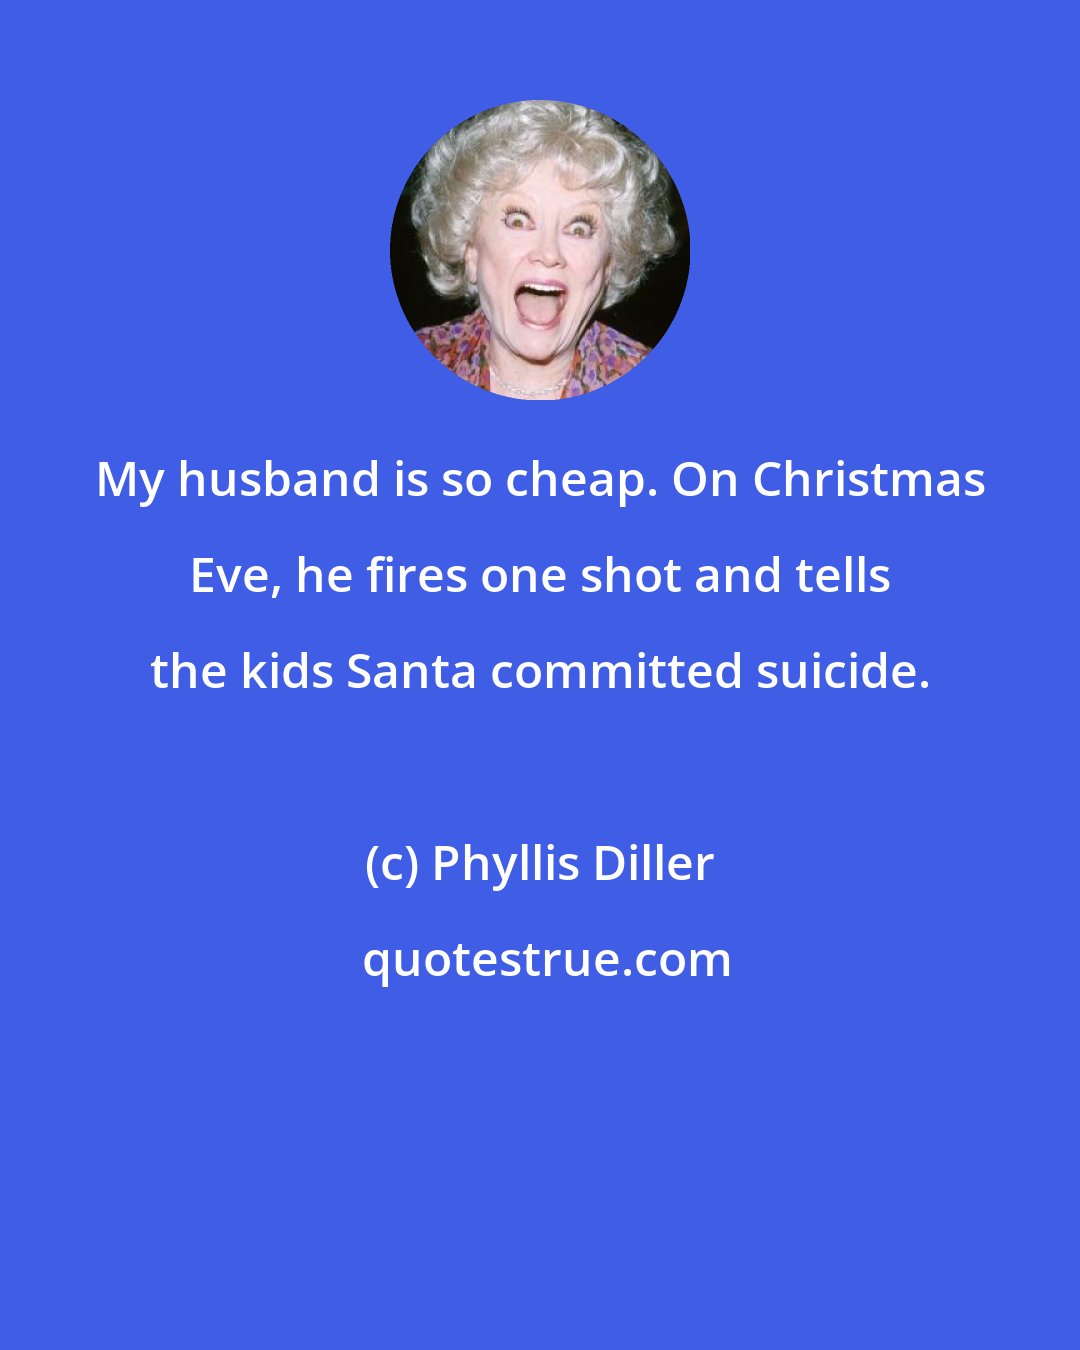 Phyllis Diller: My husband is so cheap. On Christmas Eve, he fires one shot and tells the kids Santa committed suicide.